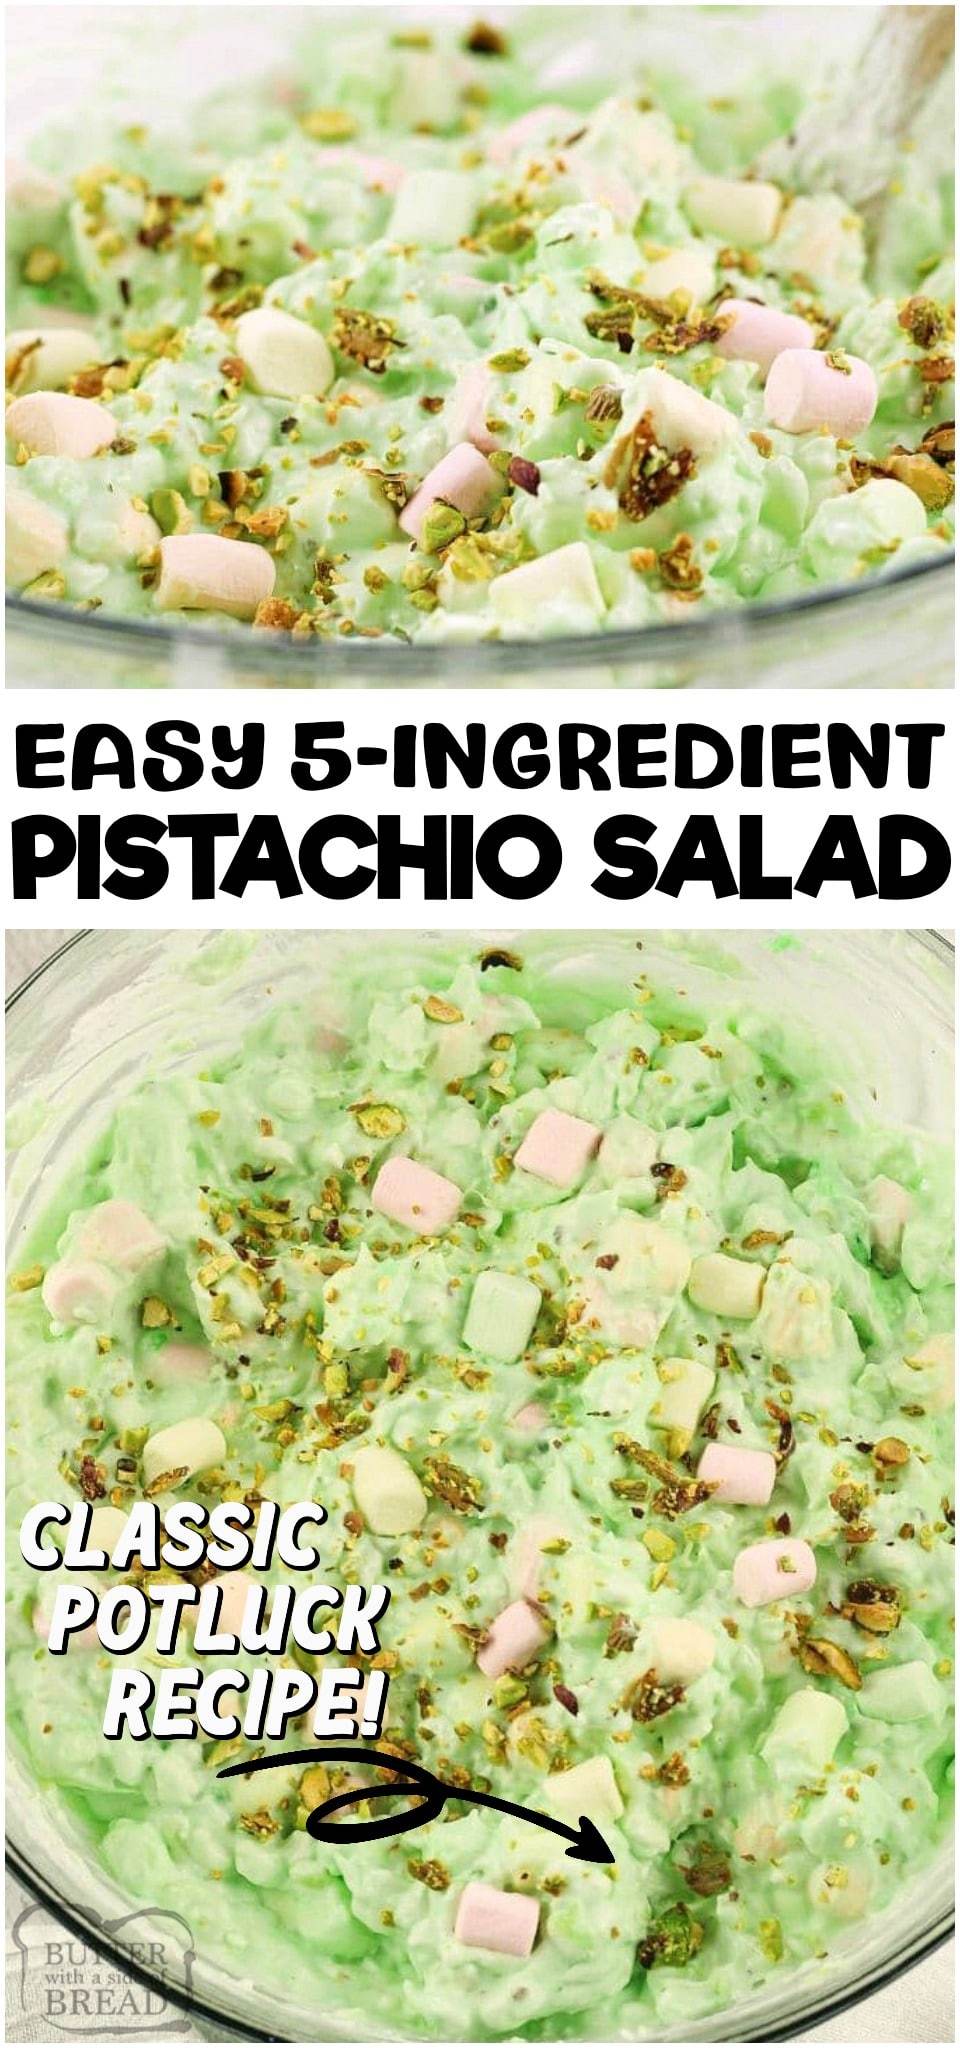 EASY 5-Ingredient Pistachio Salad made with pudding mix, pineapple, sweet cream & marshmallows! 5 minute potluck fruit salad recipe everyone loves! #pistachio #pudding #salad #watergate #fluff #summer #sweet #marshmallows #whippedcream #recipe from BUTTER WITH A SIDE OF BREAD